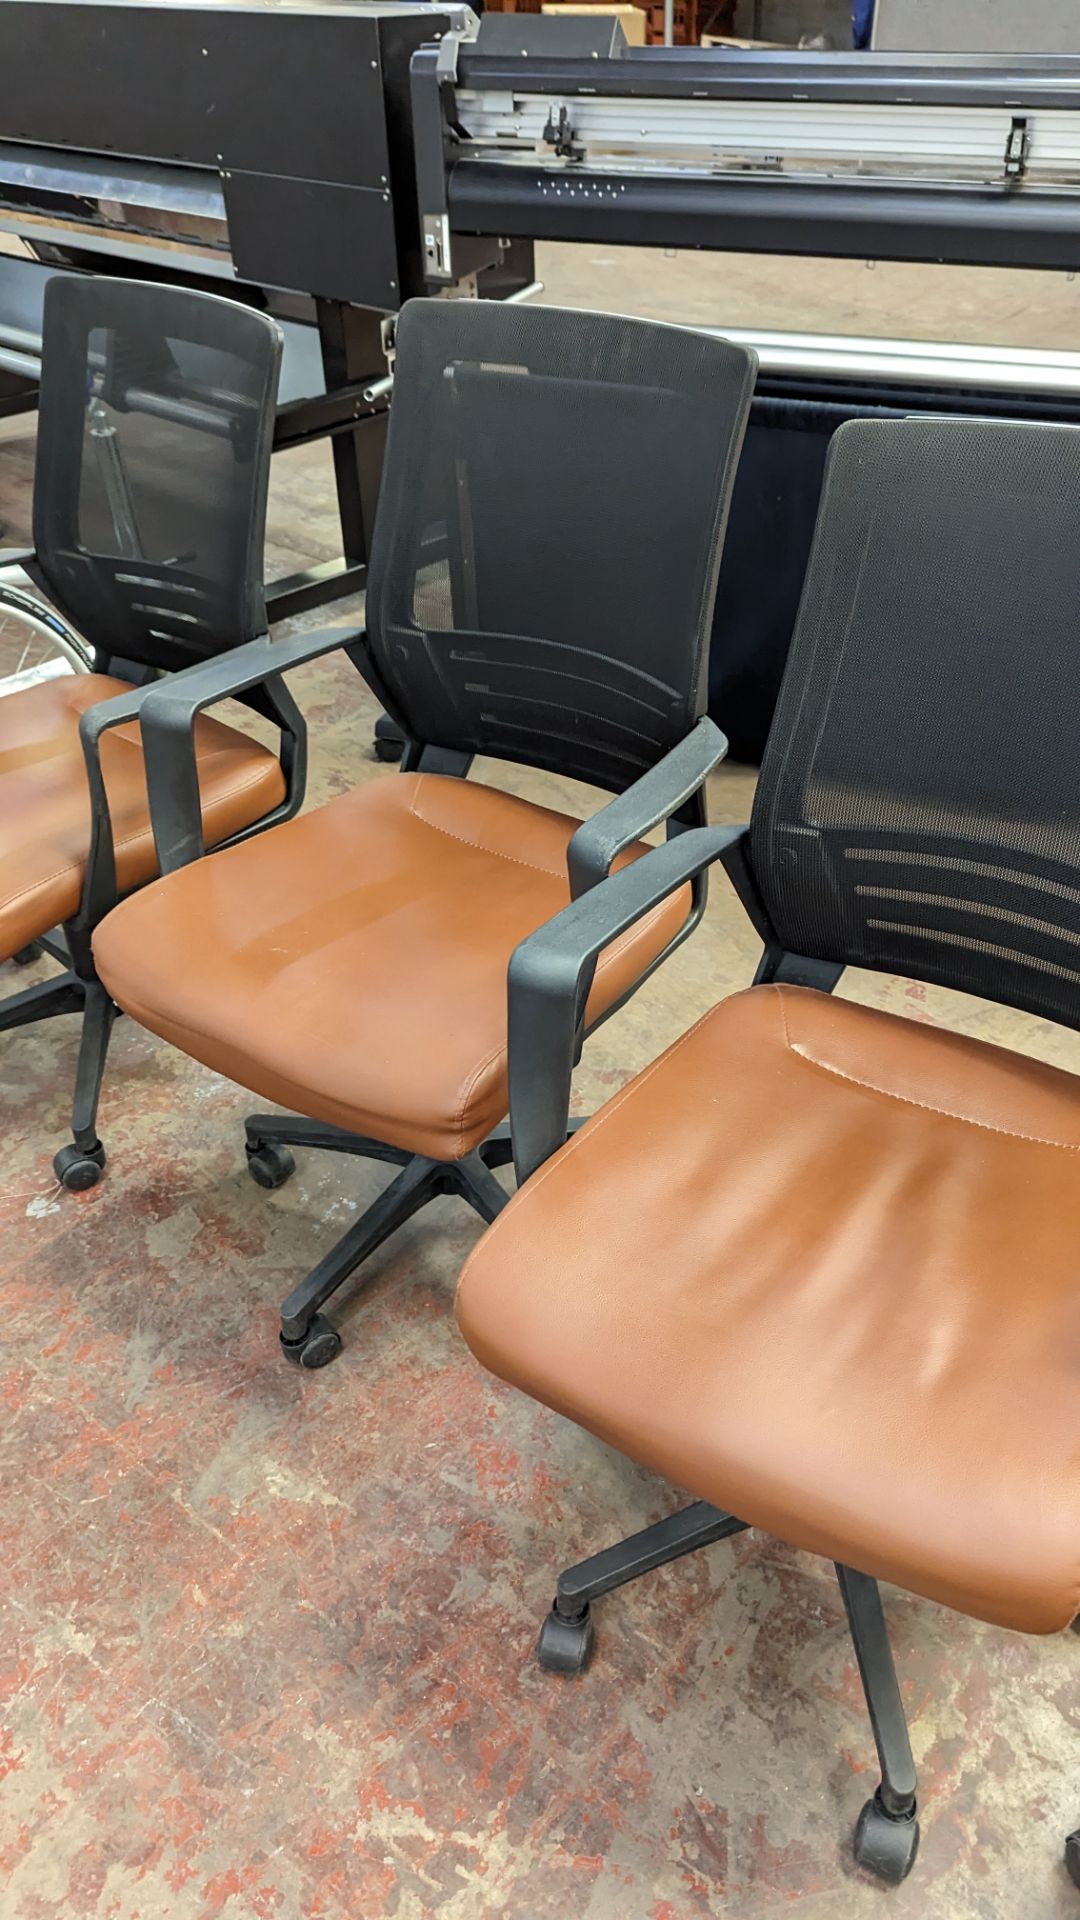 4 off matching modern mesh back chairs with brown leather/leather look seat bases, one of which has - Image 7 of 10